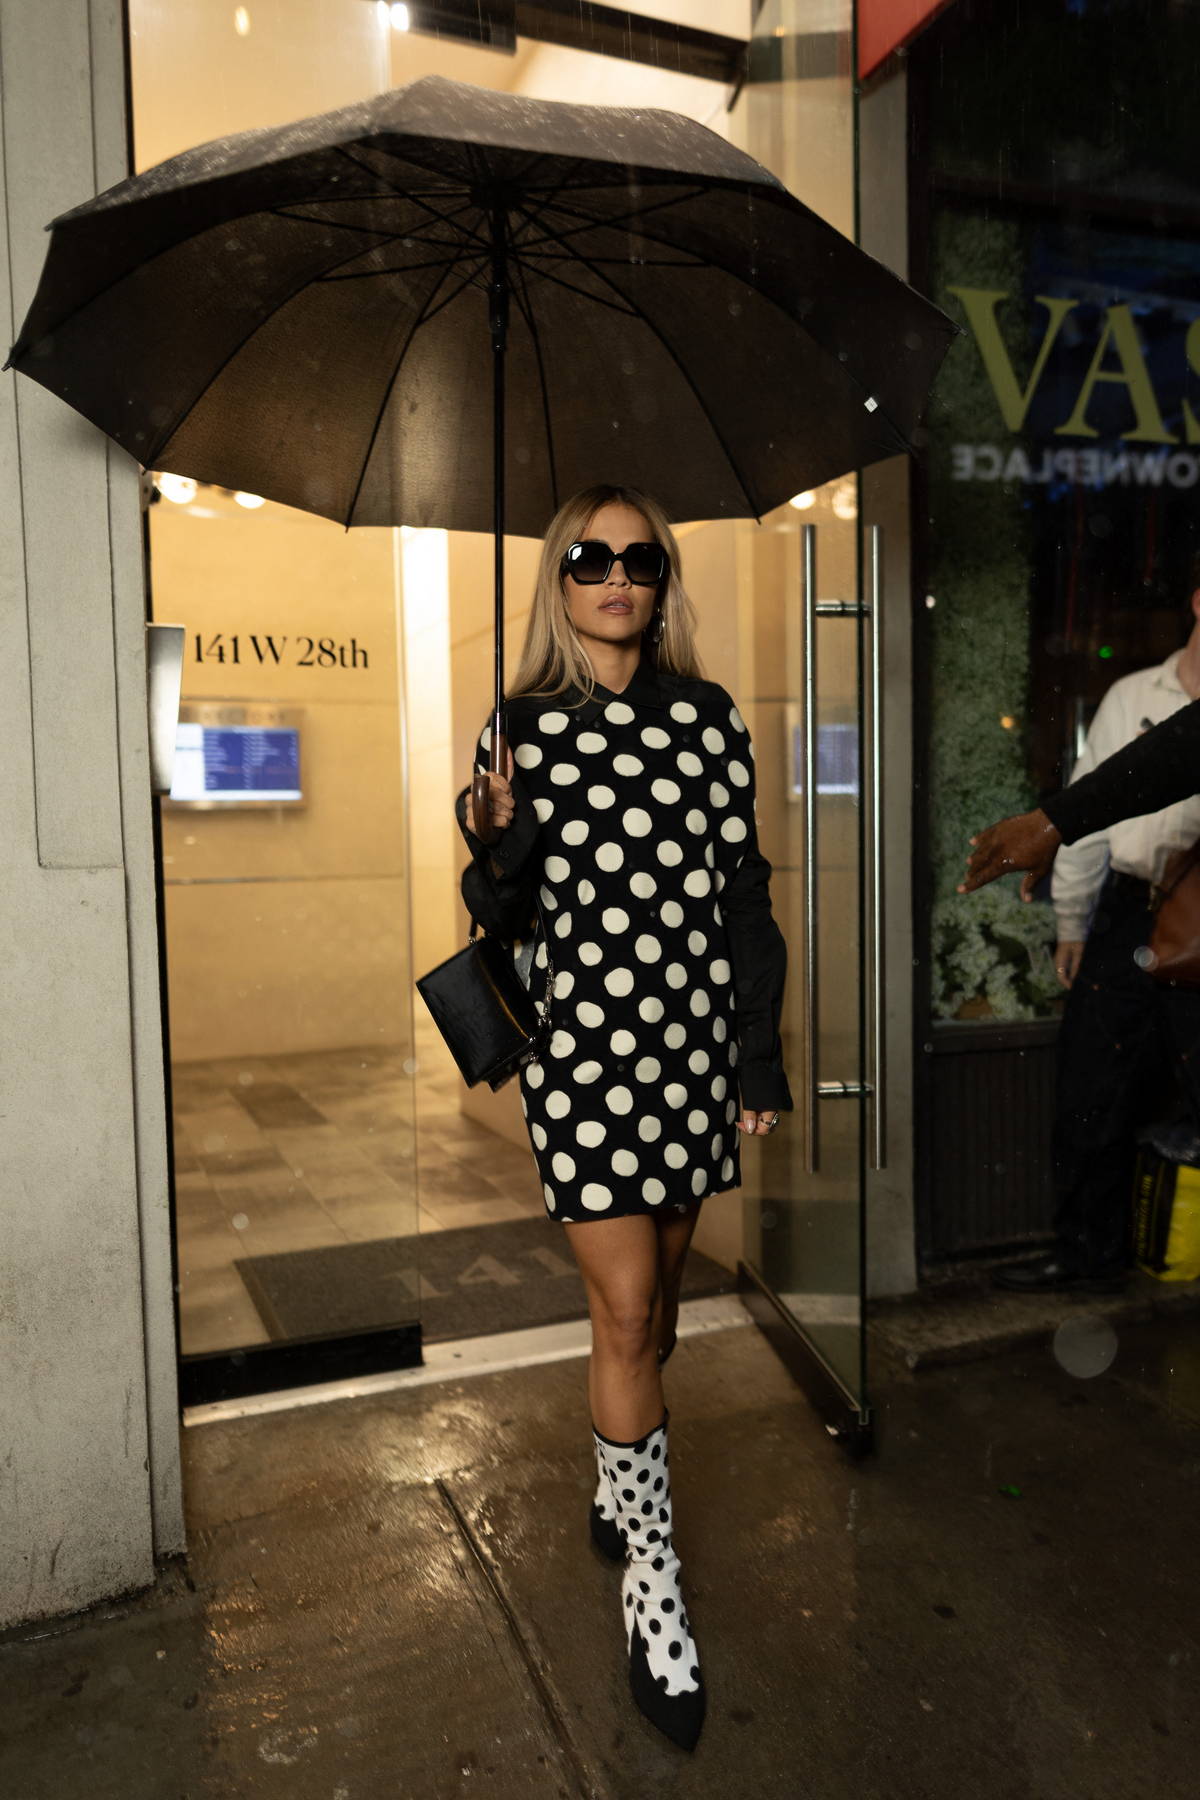 Rita Ora looks fashionable in a polka dot dress with matching shoes as she  leaves a photo studio in New York City